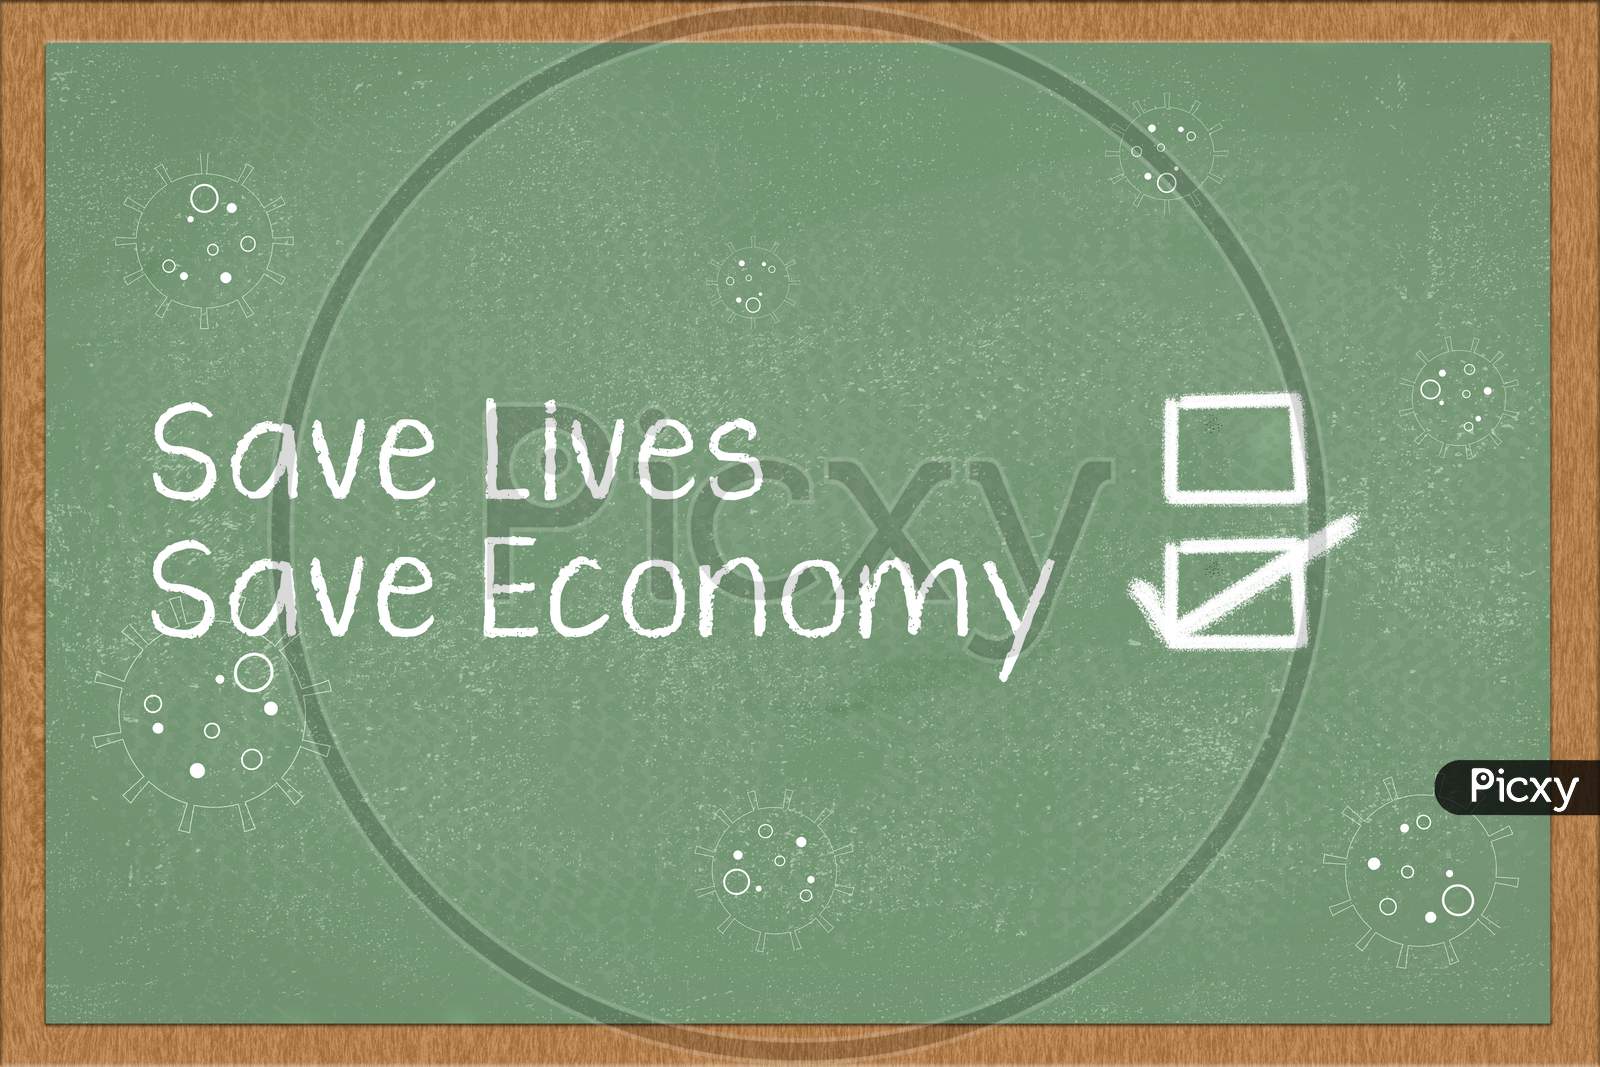 Save Lifes and Save Economy Written on a Green Board with Save Economy Ticked